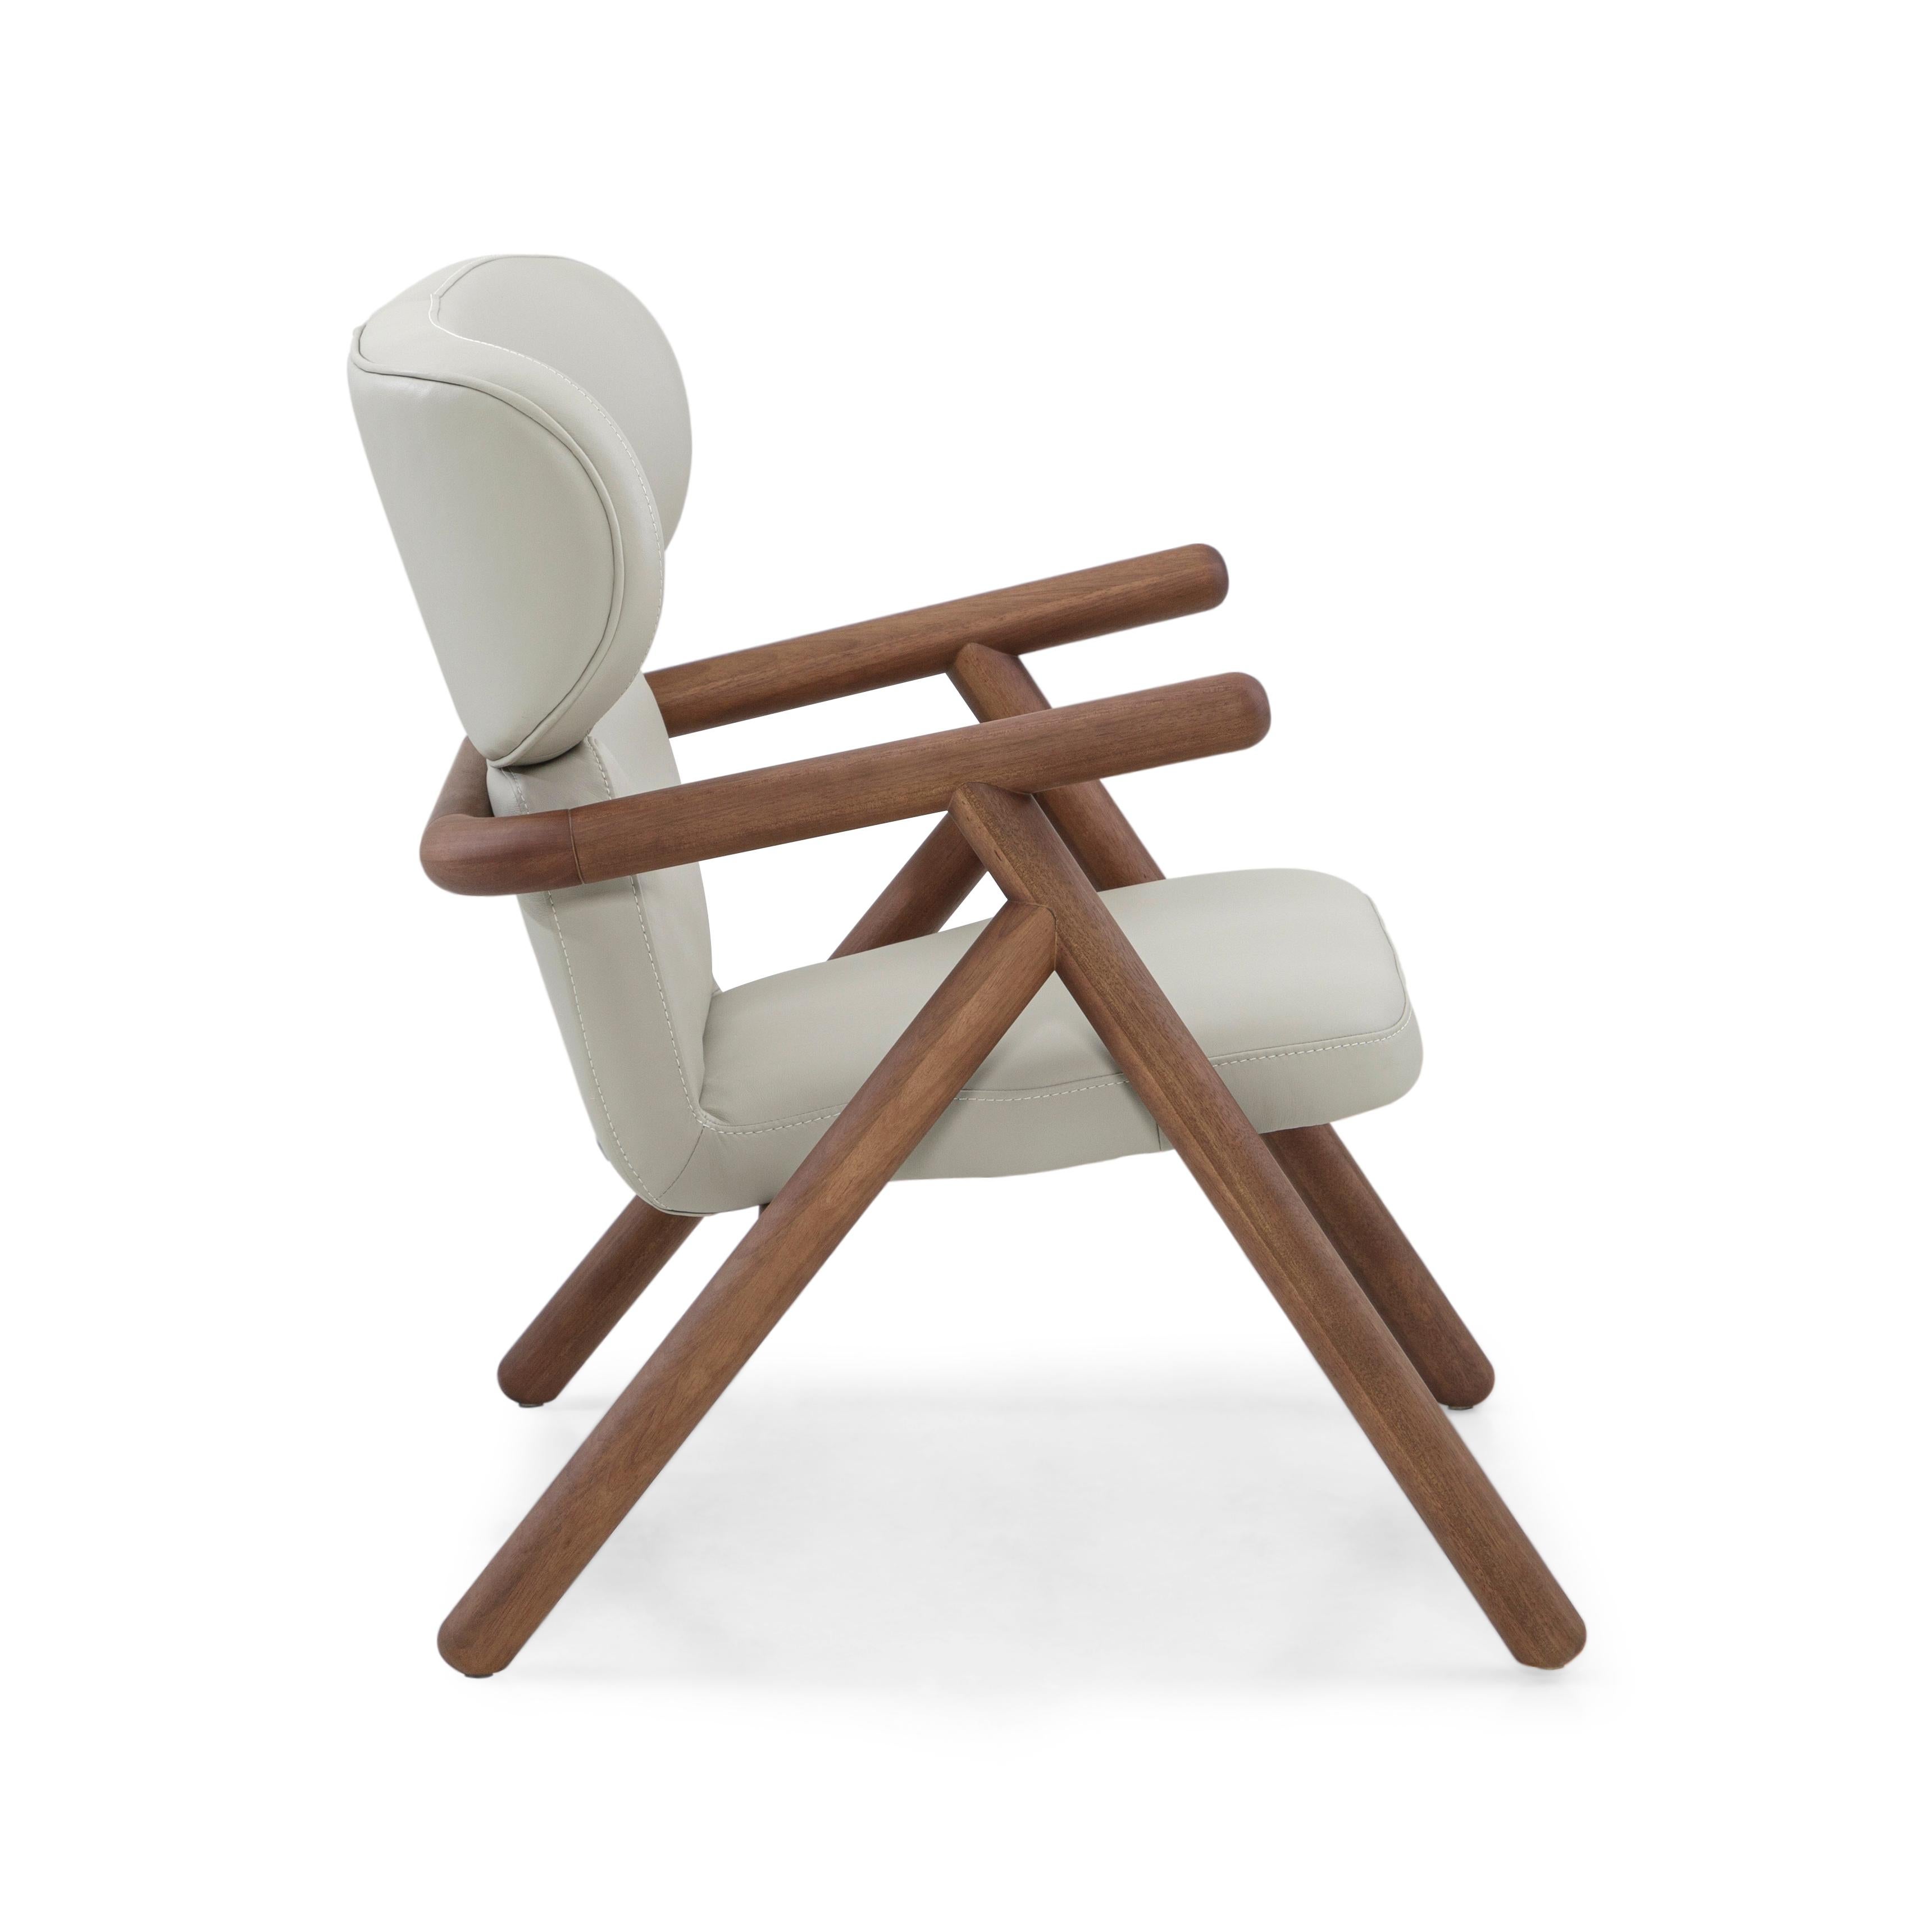 The Sole armchair is an interpretation of the Scandinavian style with a walnut wooden shell finish multi-laminated and an upholstered off-white leather covering the seat and back. This armchair has been designed by our Uultis team with the best foam